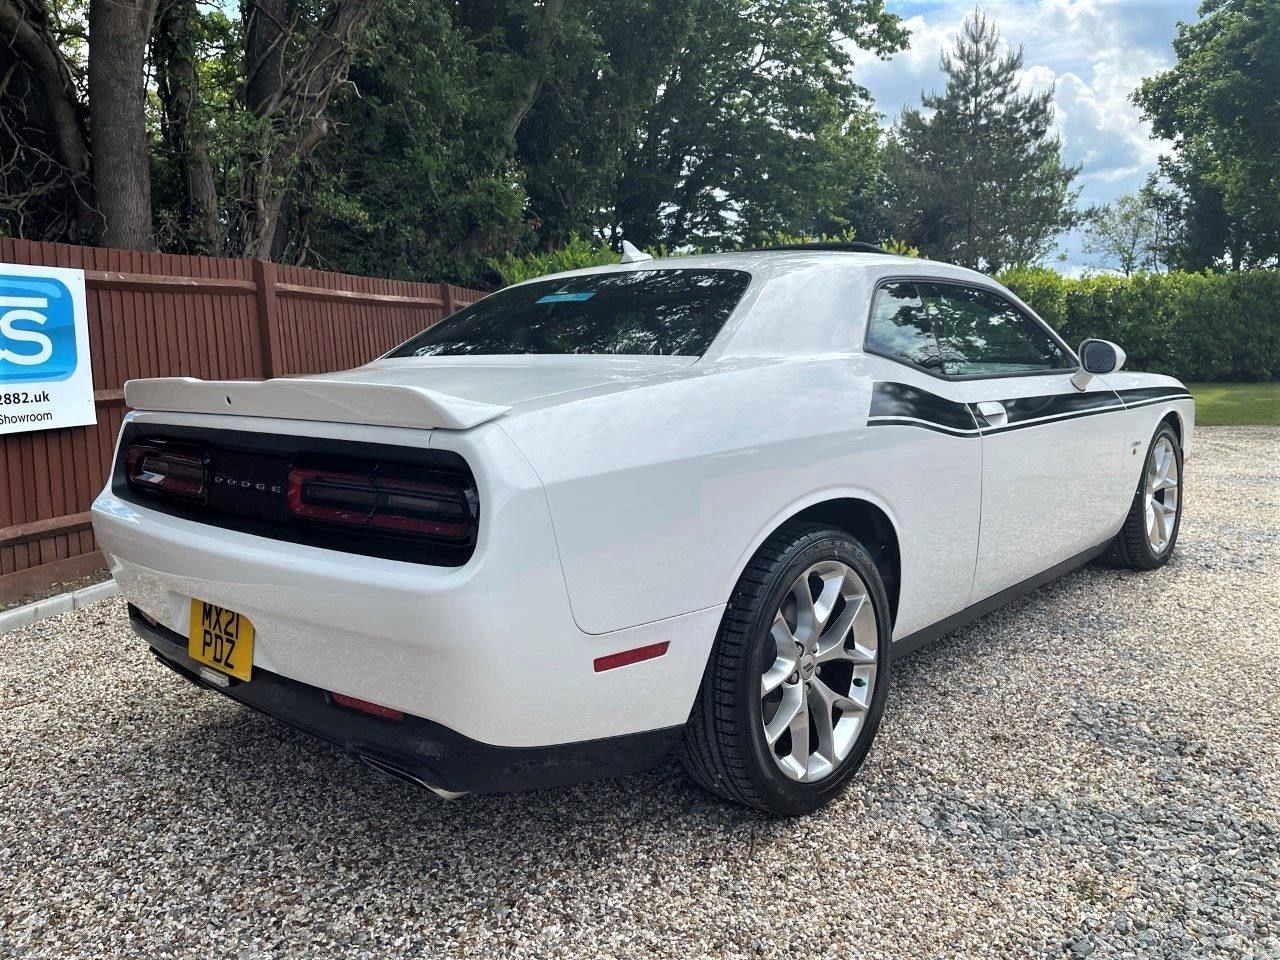 2021 Dodge Challenger Rt Plus V8 Hemi 8 Speed Automatic For Sale Ccfs